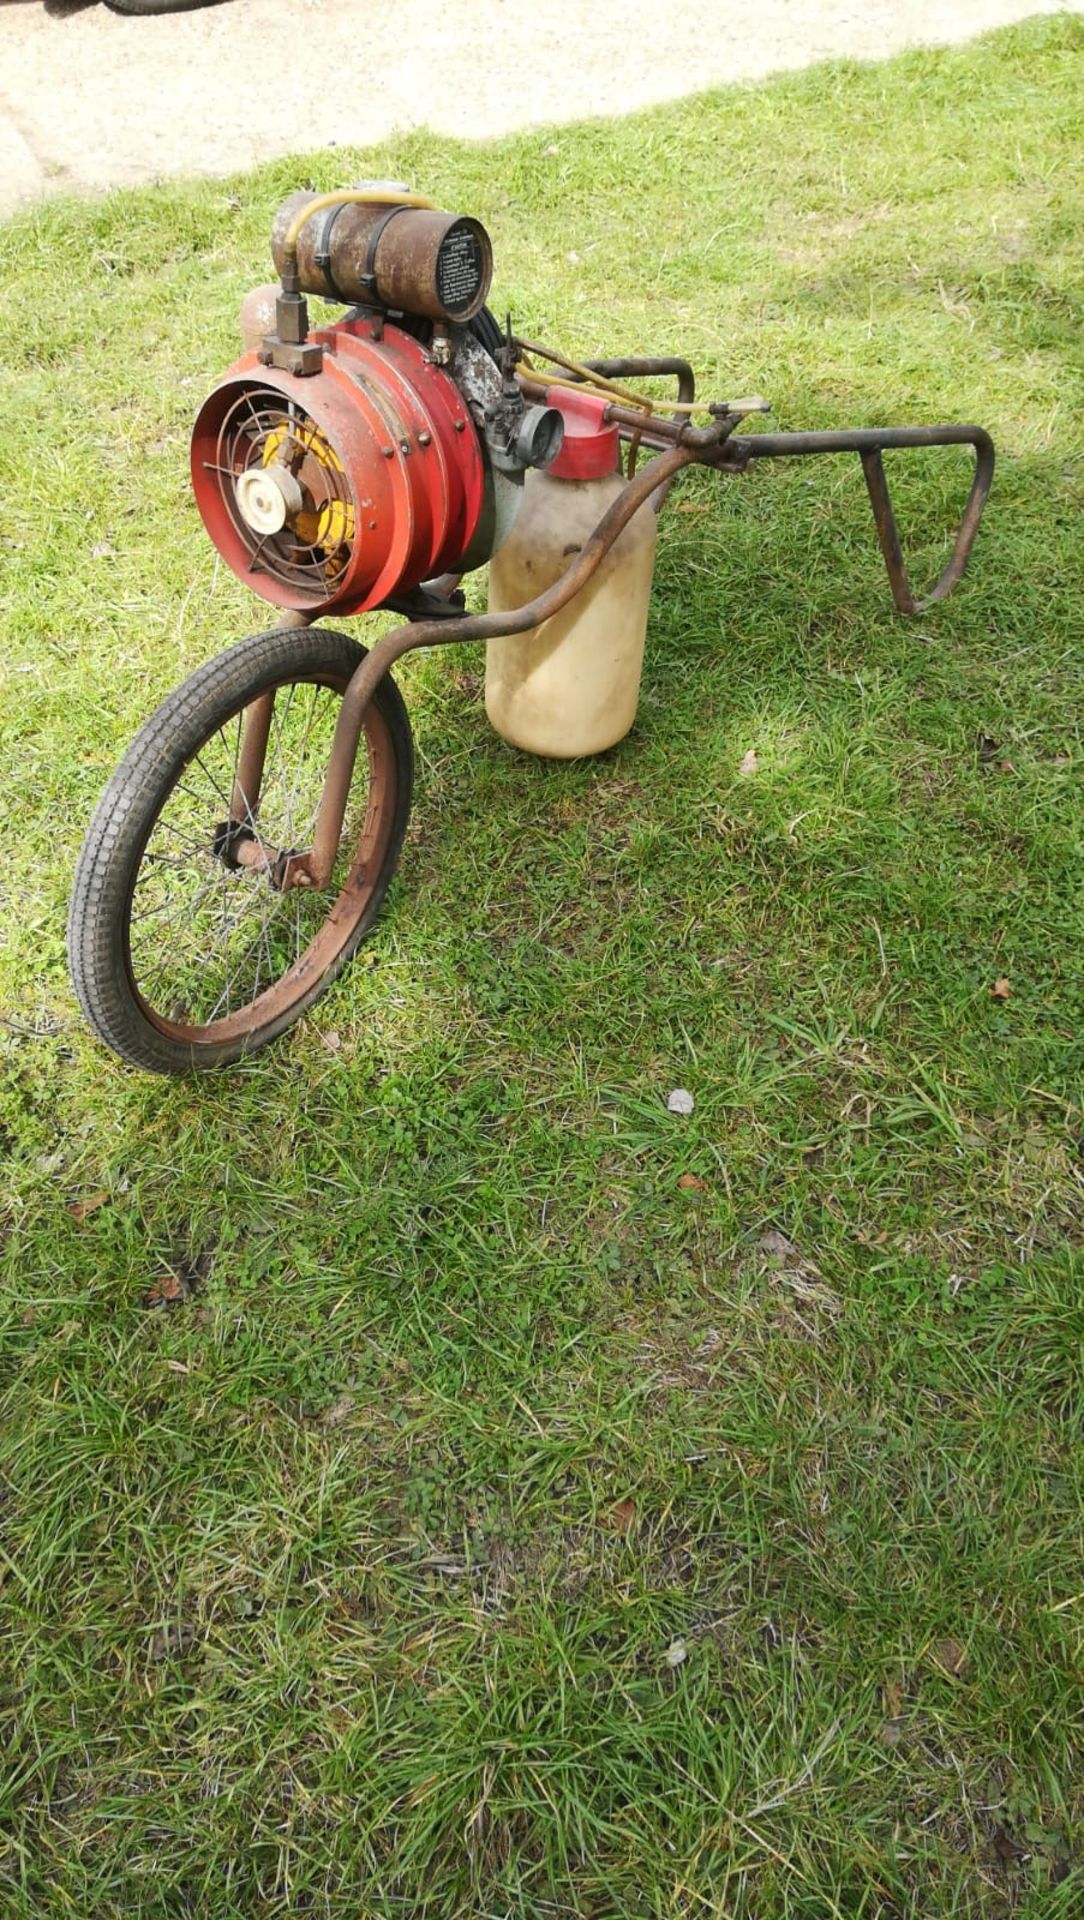 Micronette sprayer, 2 stroke engine free and complete but sold as seen - not had running.